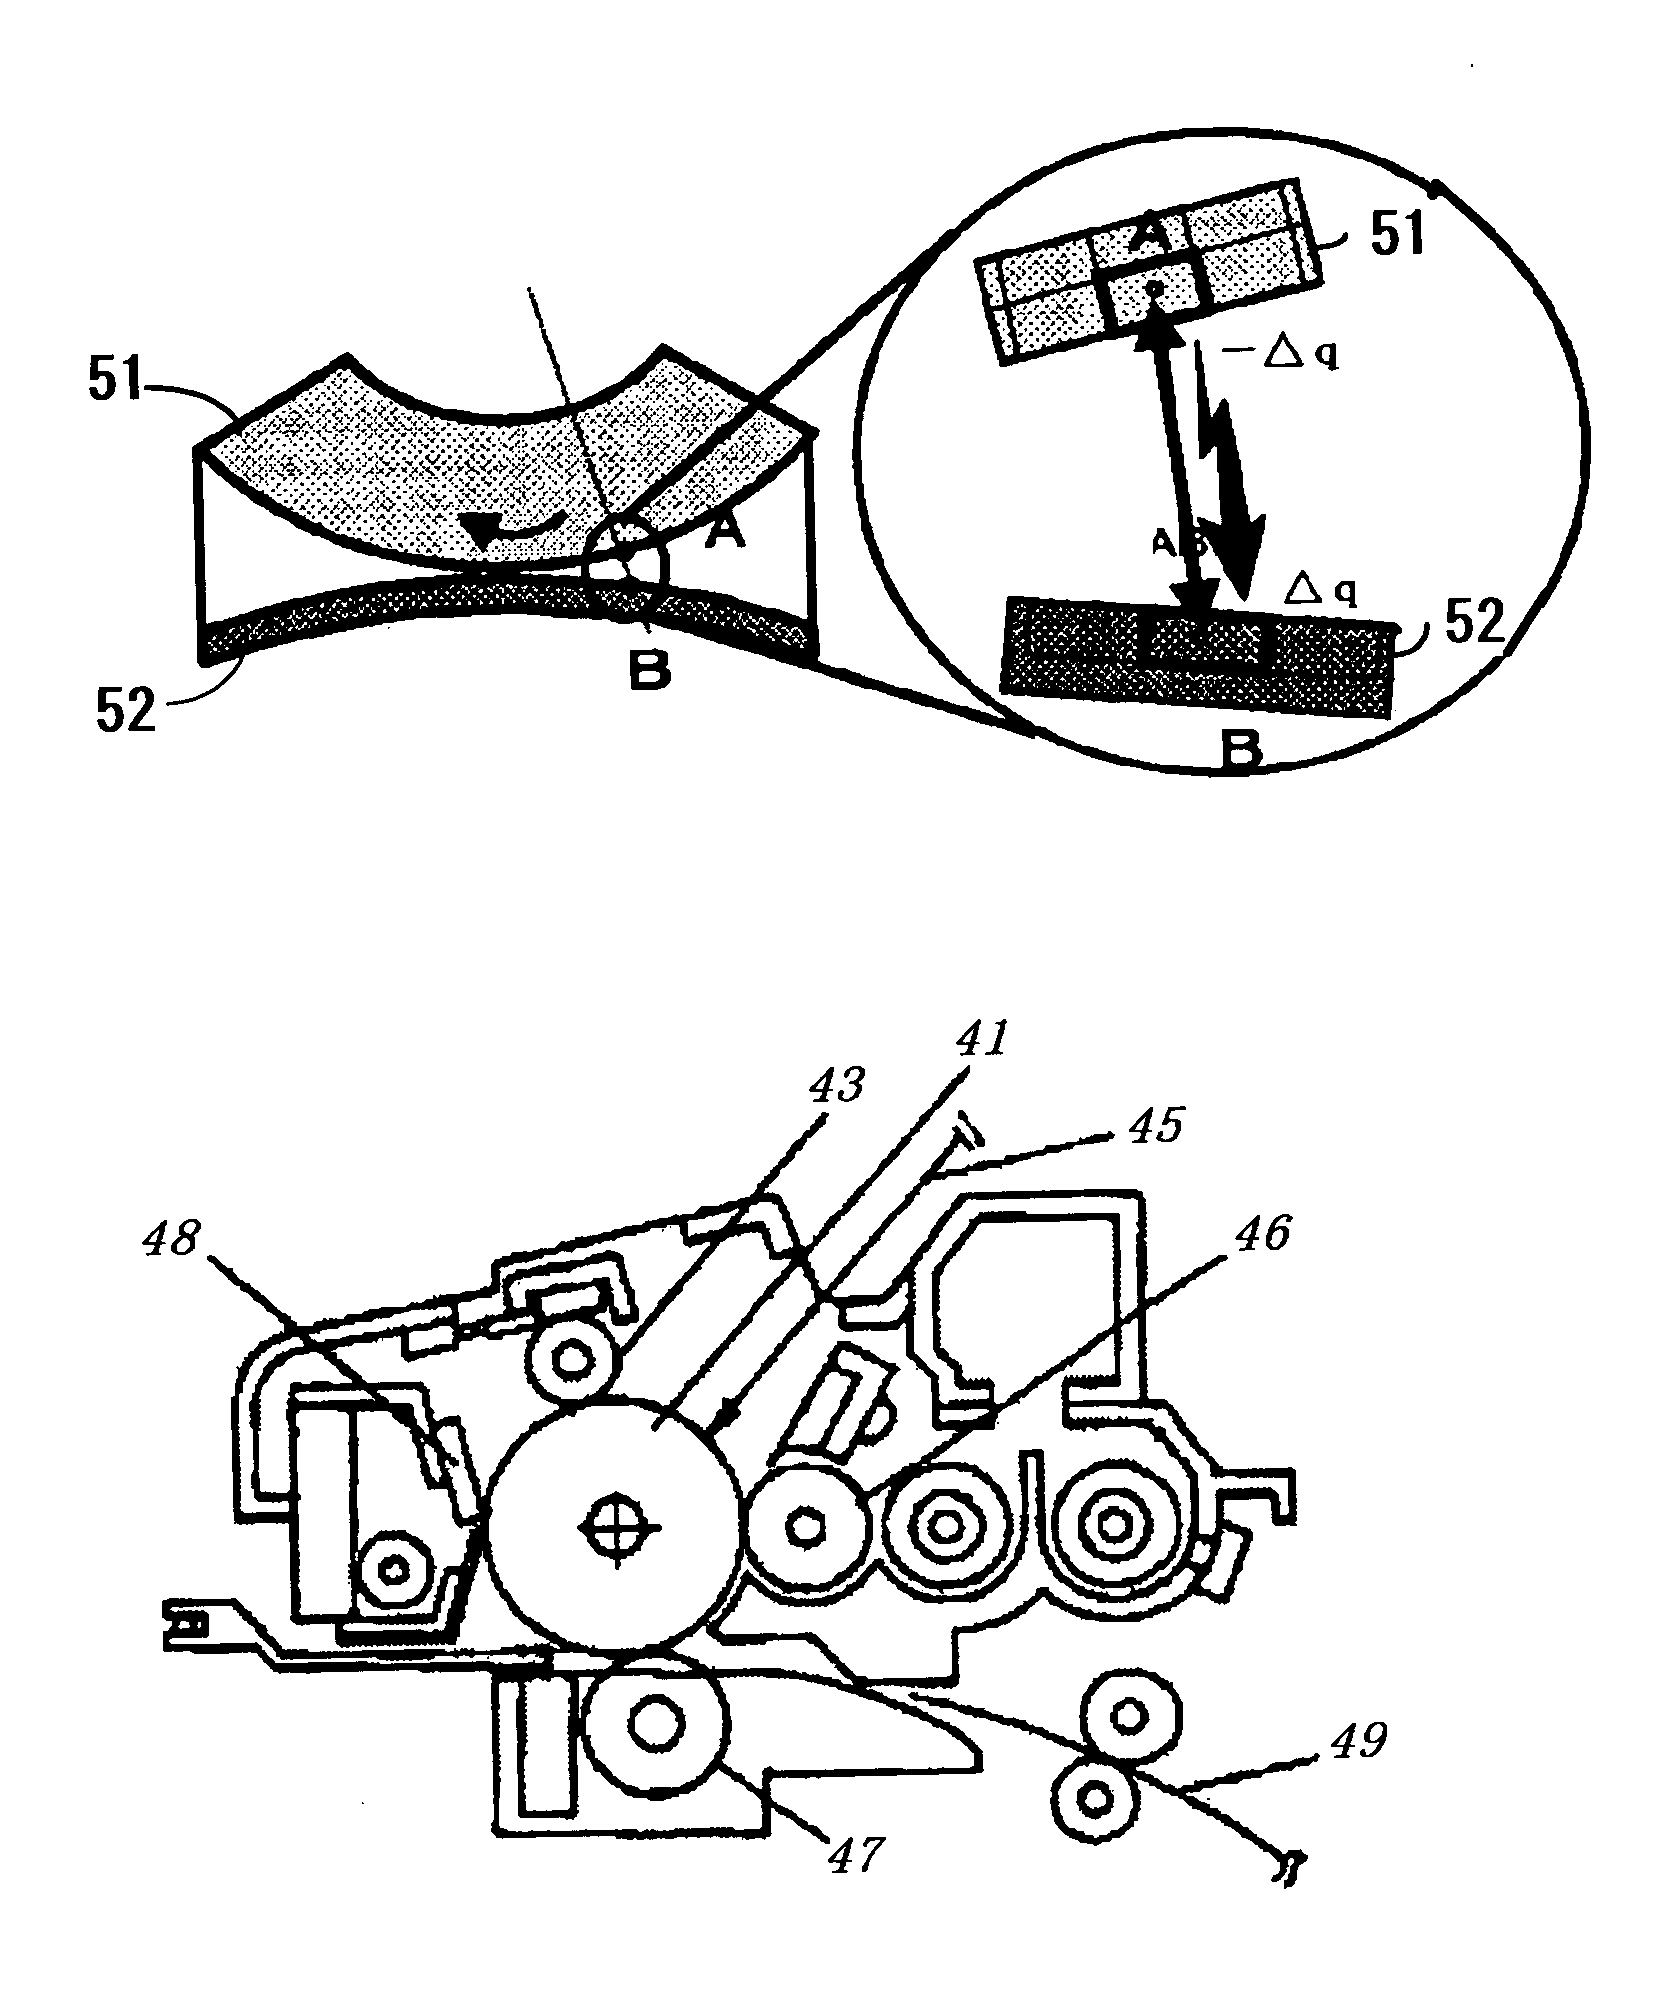 Image forming apparatus, image forming process, and process cartridge